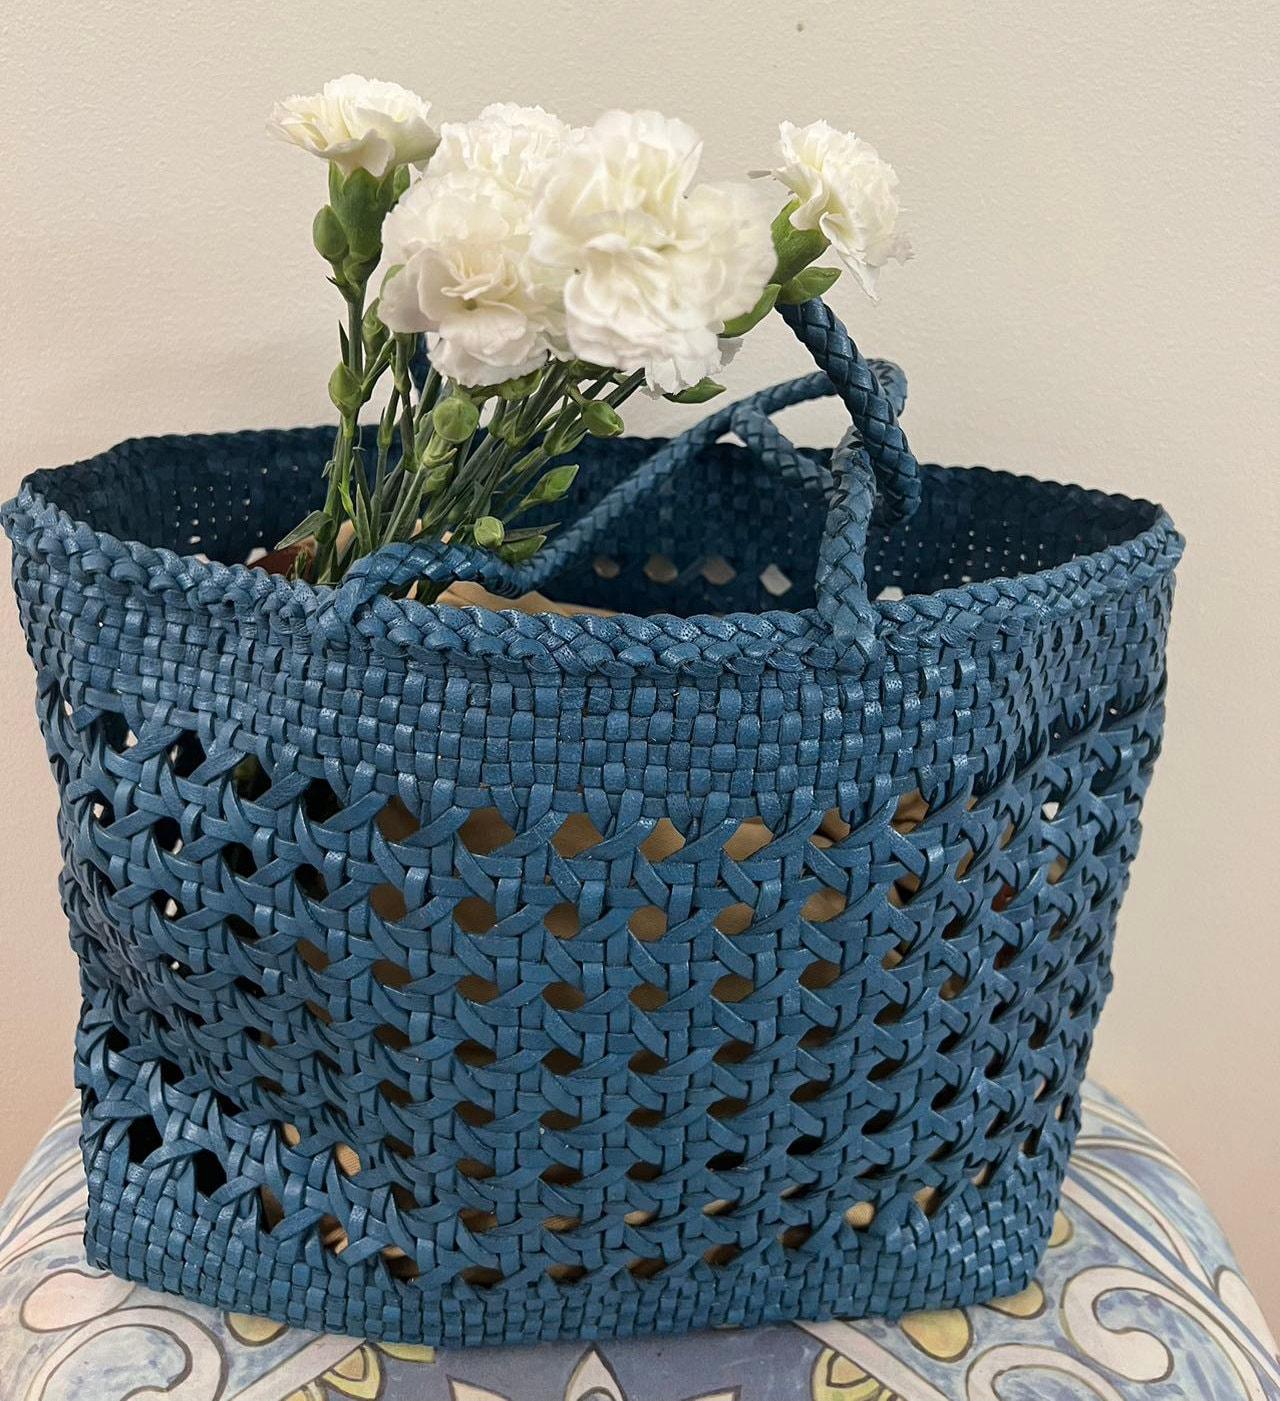 Blue Genuine Leather Hand Woven Cuboid Shaped Ladies TOTE, Open Rattan Woven Triple Jump Bamboo Ladies Hobo Holiday Bag, Beach Basket Bag